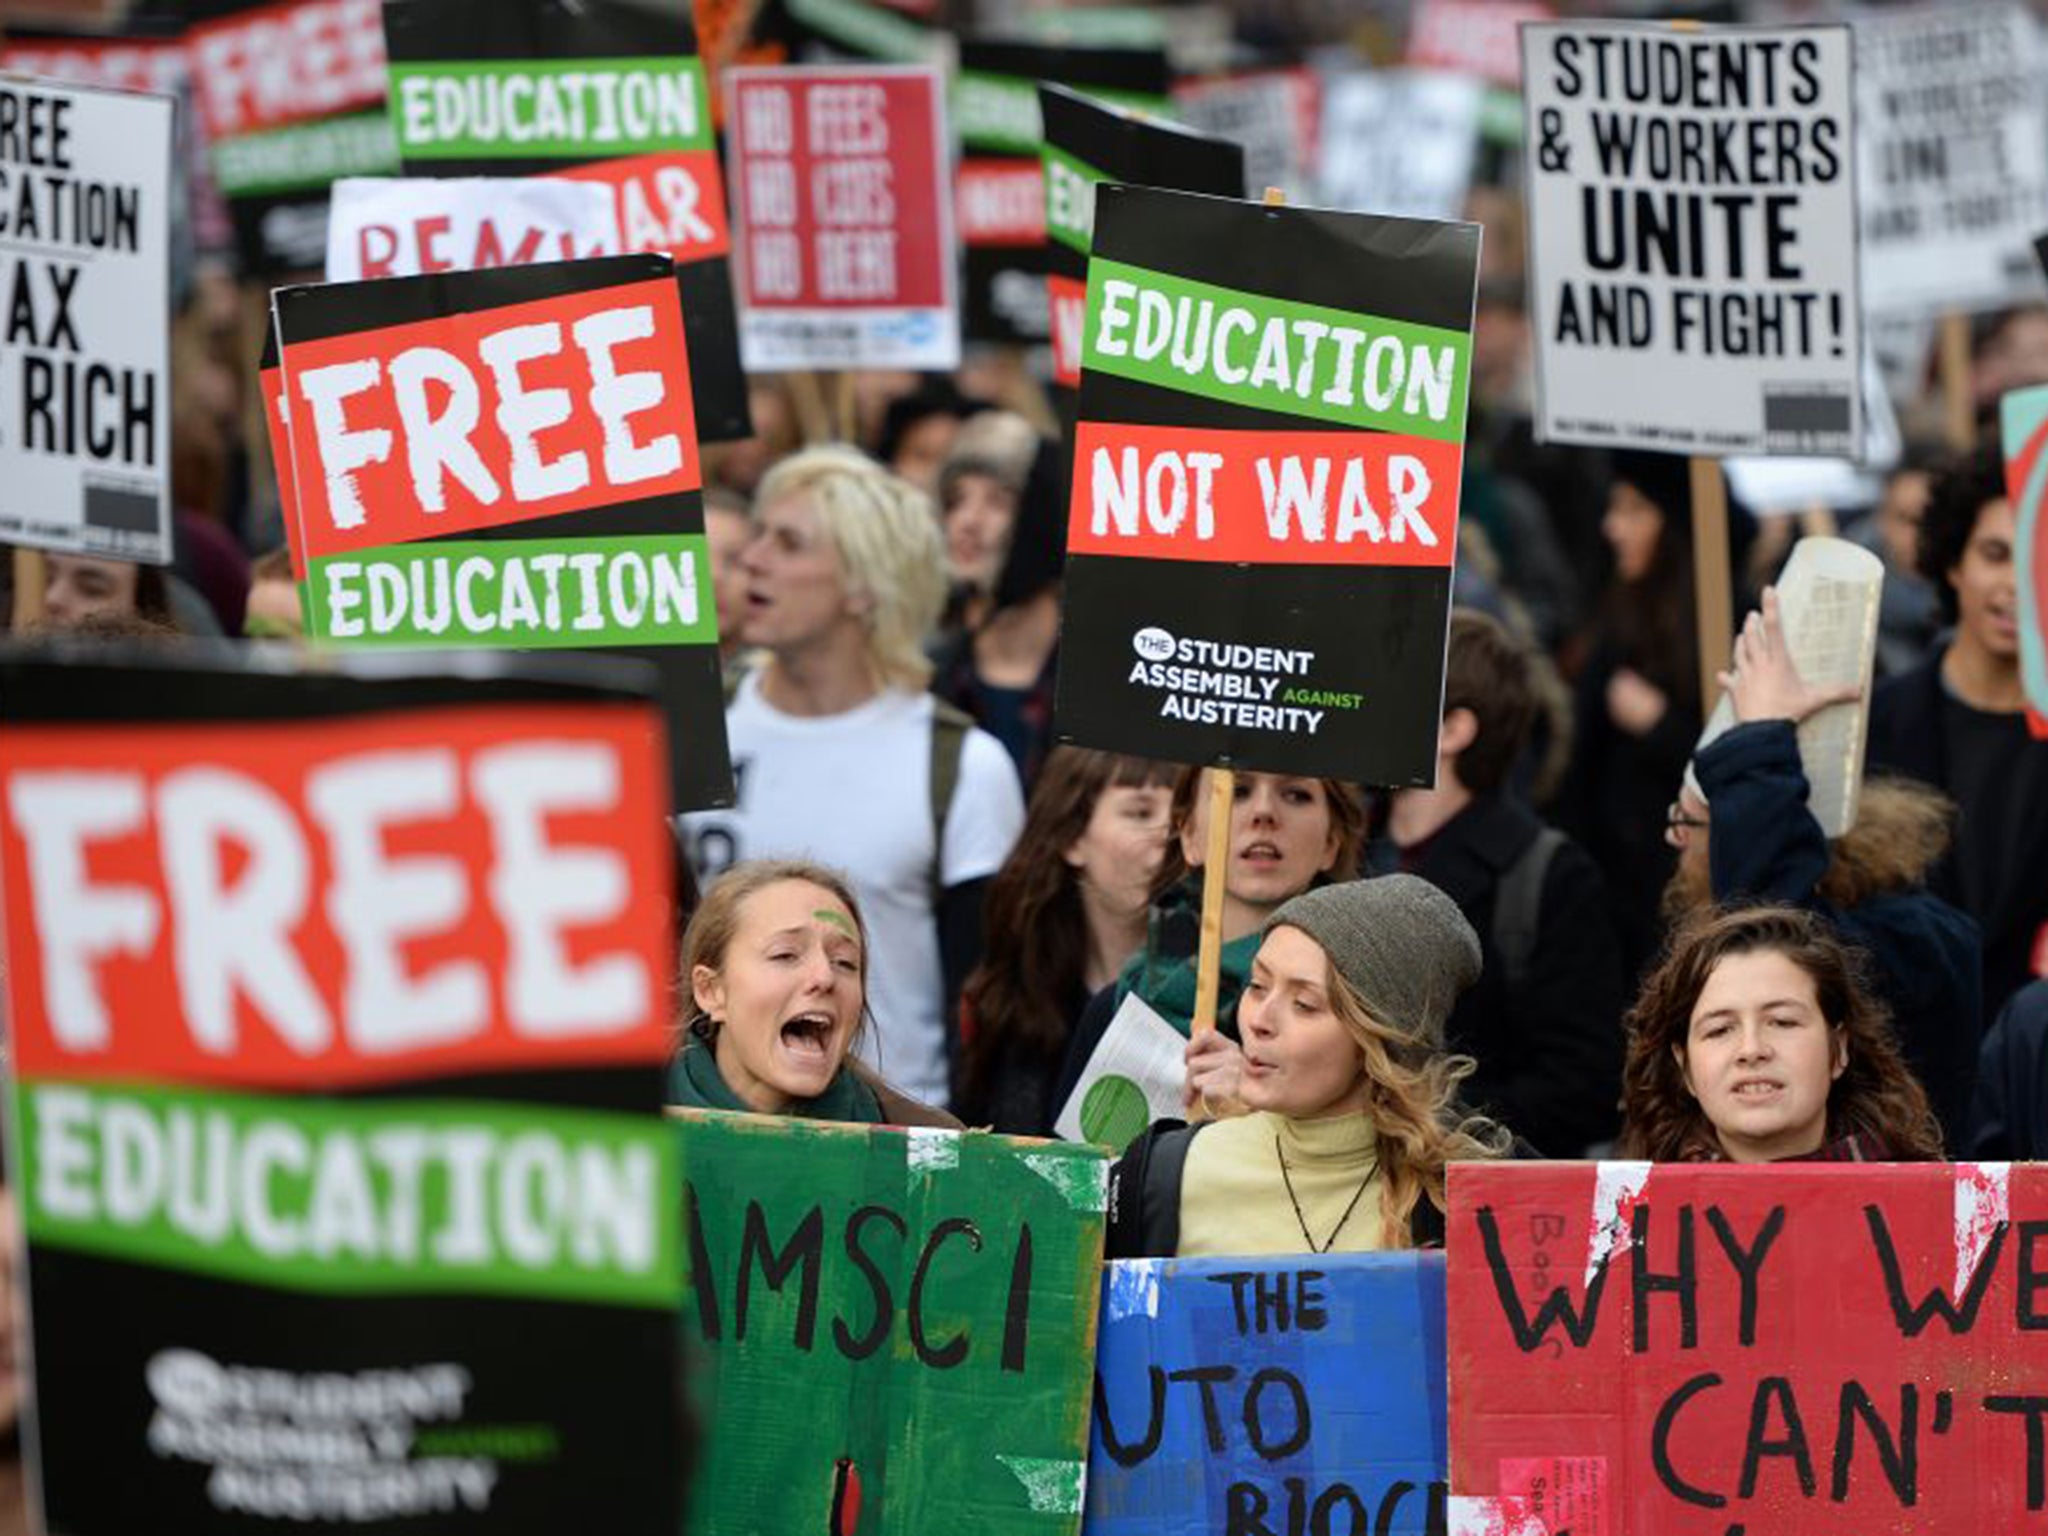 A protest against tuition fees in London last November